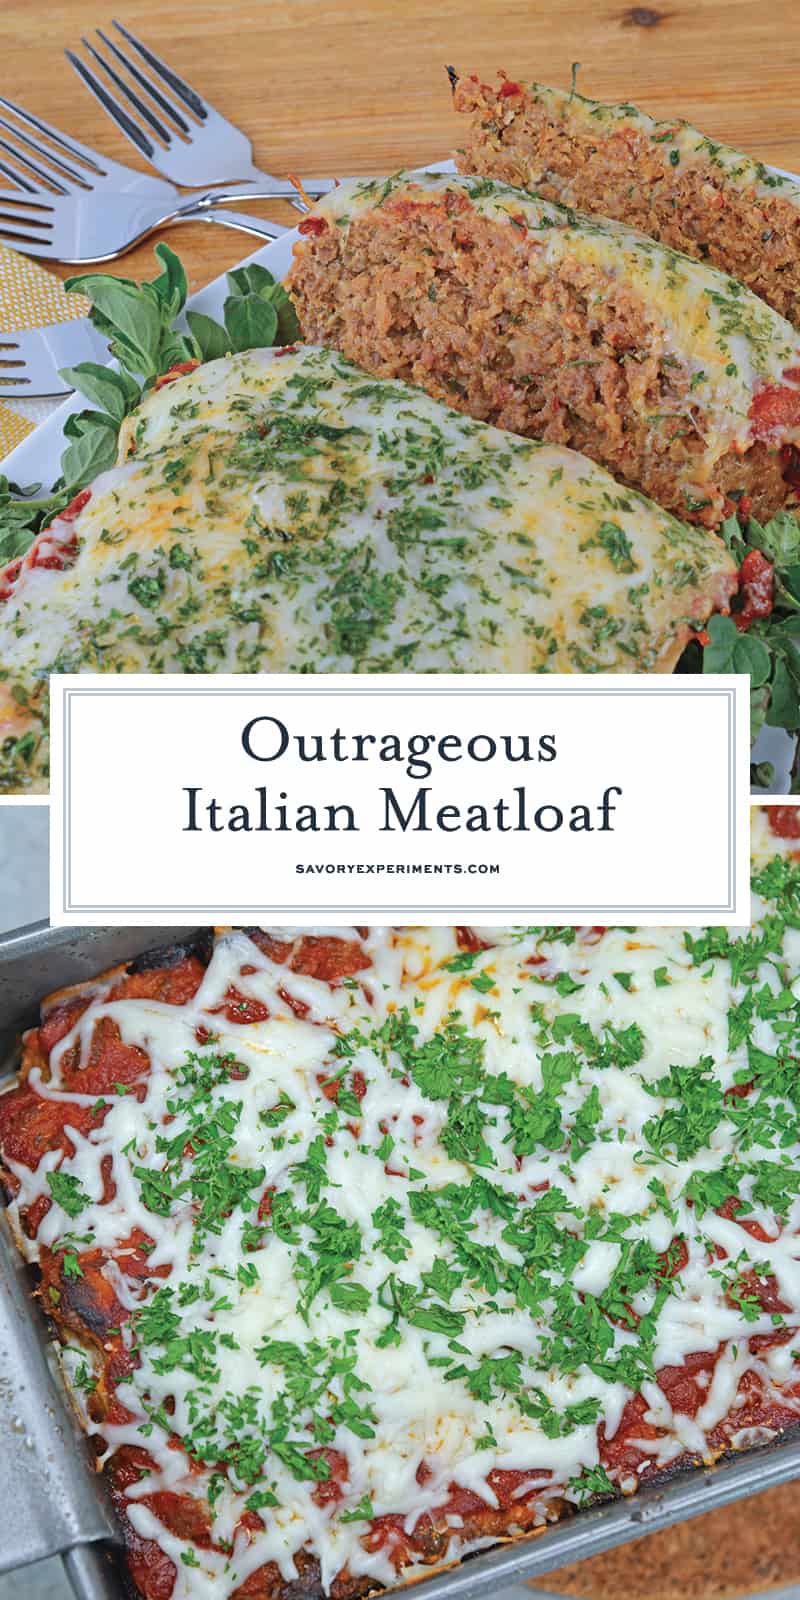 Italian Meatloaf blends Italian sausage and ground beef with spices and cheese for a tender one dish meal. The perfect family meal! #bestmeatloafrecipes #italianmeatloaf www.savoryexperiments.com 